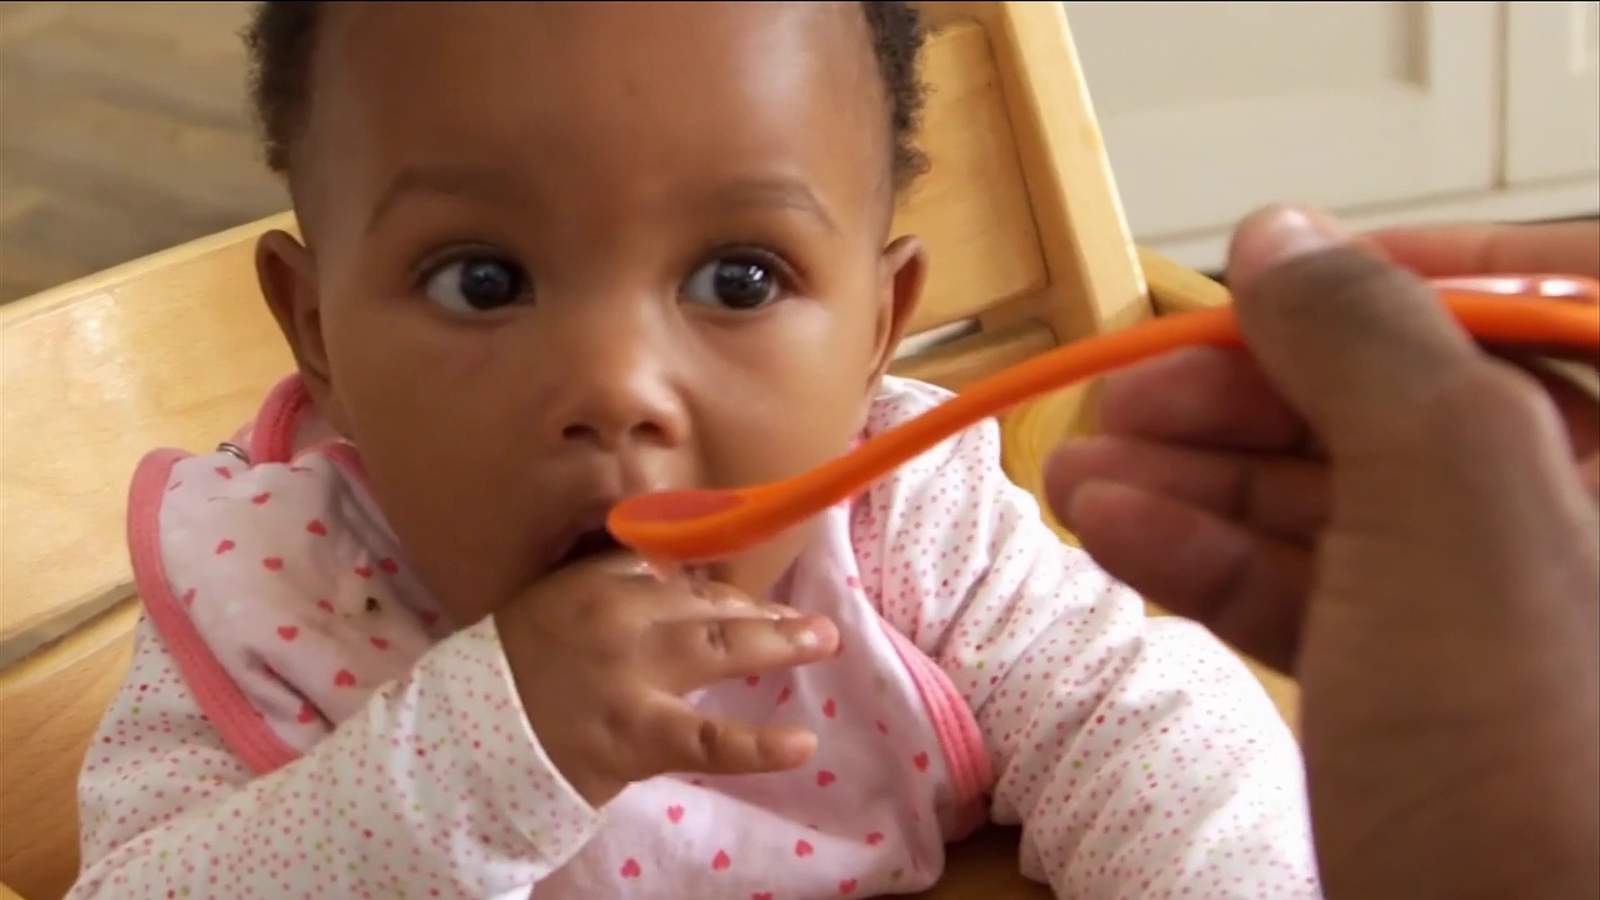 Consumer Alert: Parents, check your pantry for this baby food!